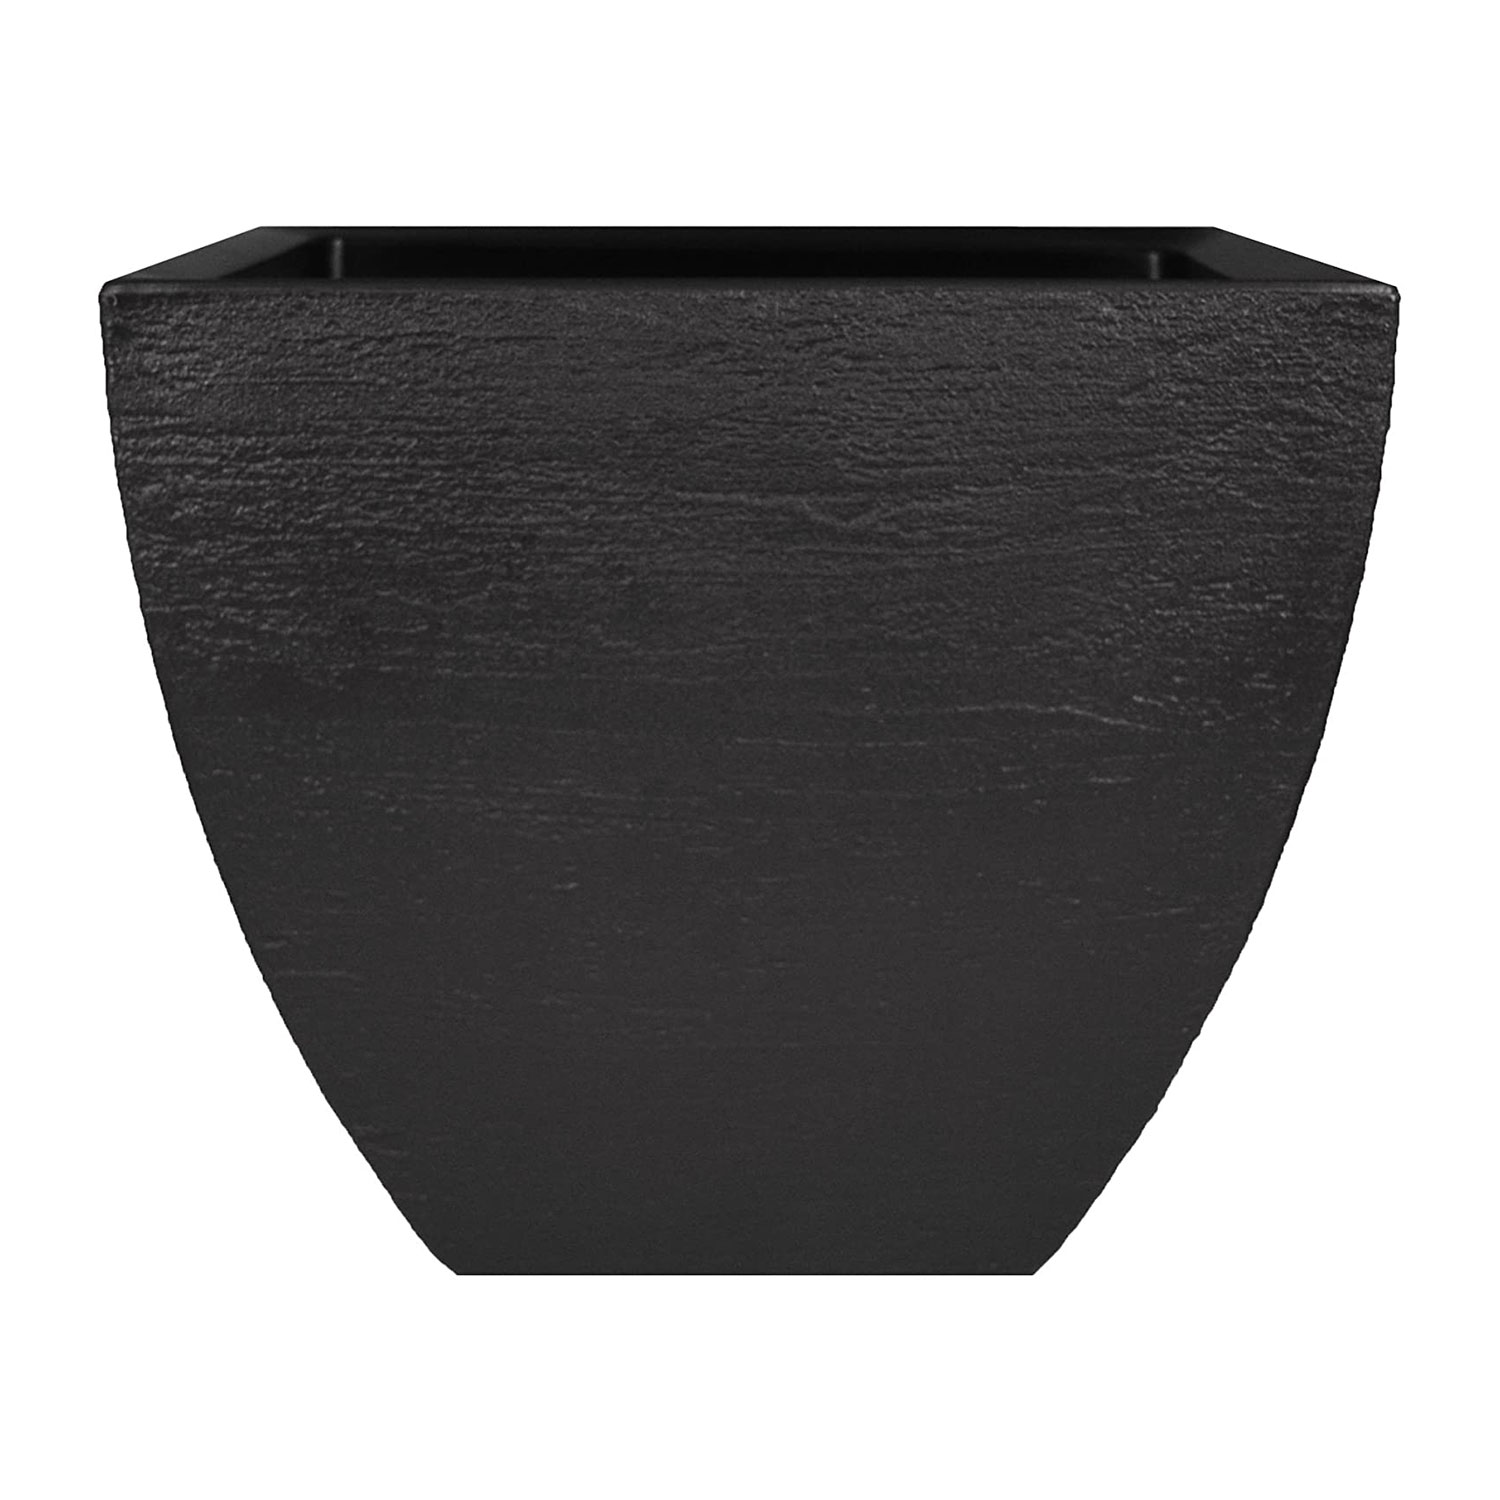 Tusco Products Modern 20 Inch Molded Plastic Square Planter, Black - image 1 of 3